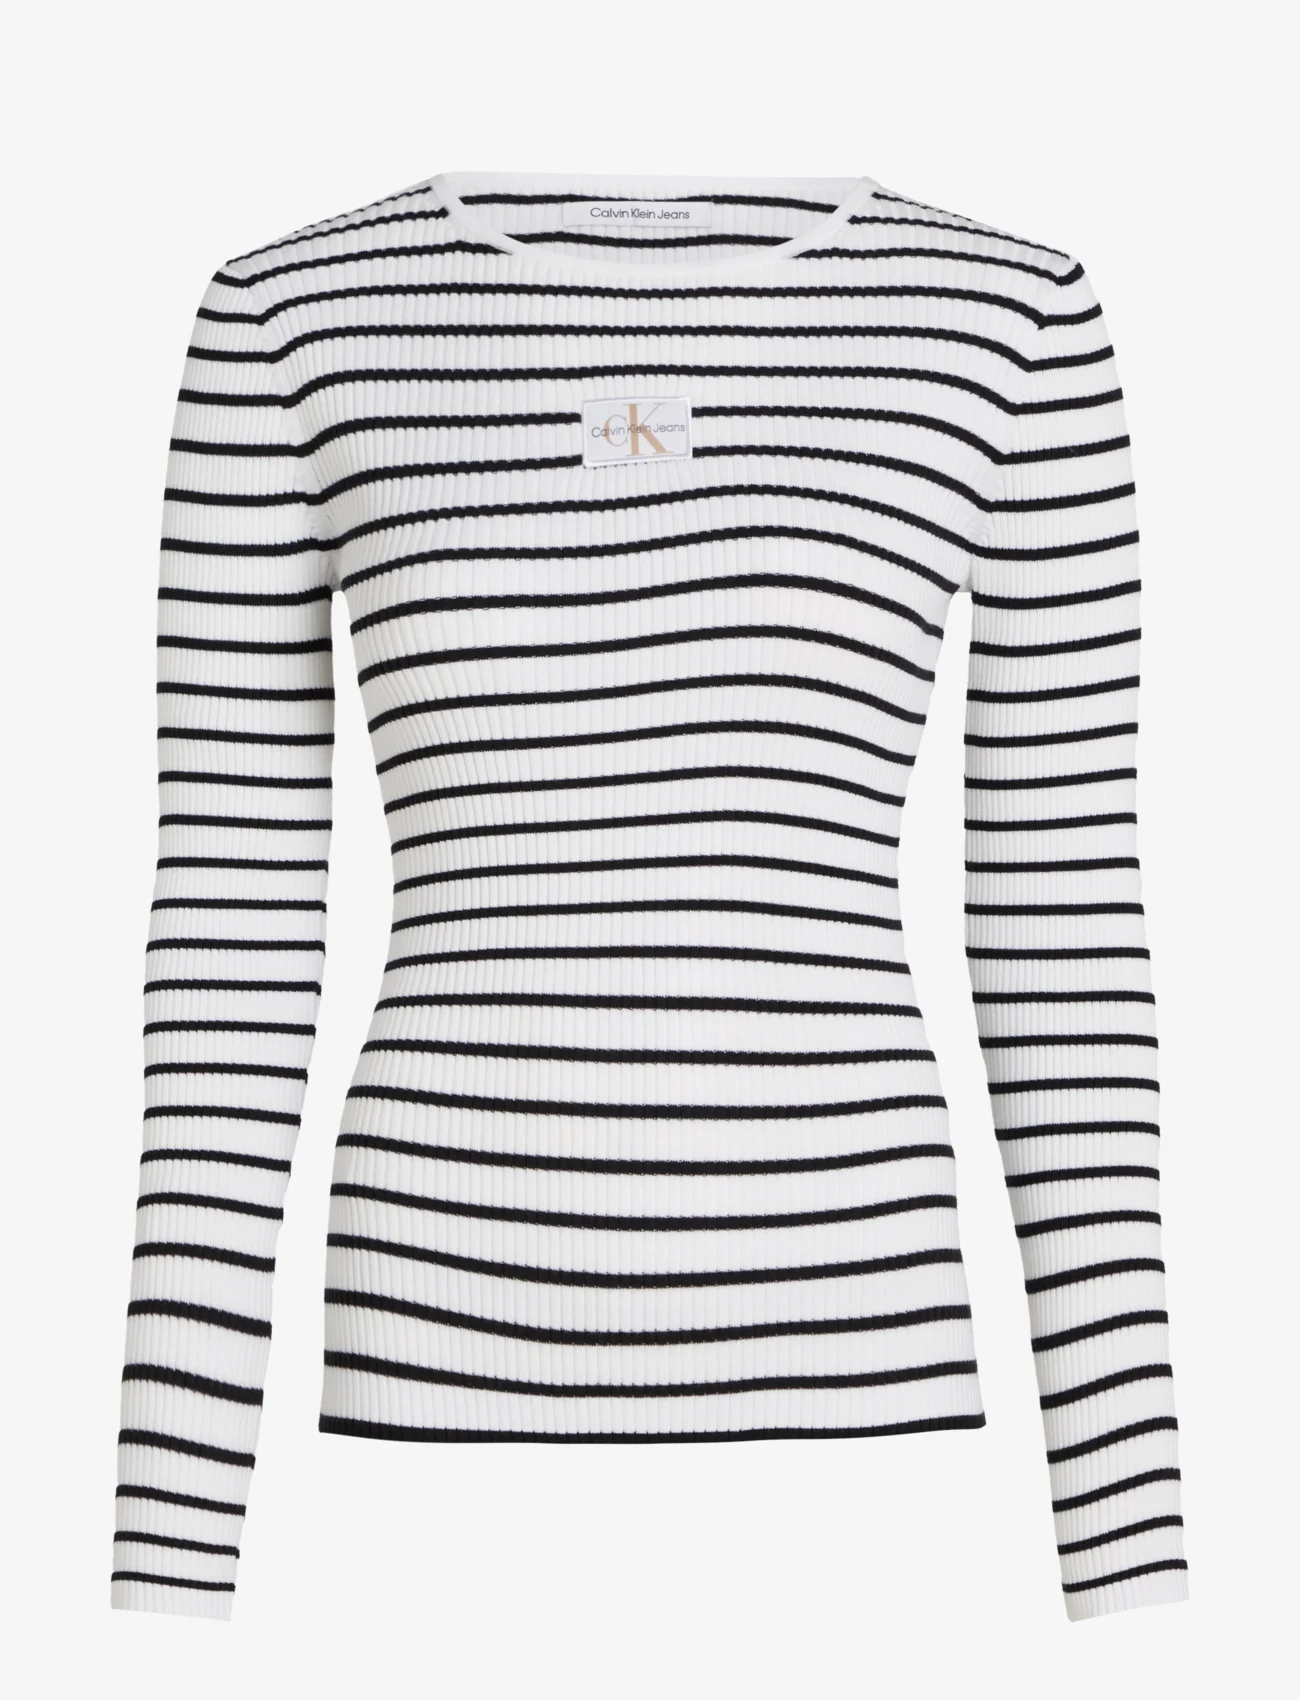 Calvin Klein Jeans - WOVEN LABEL TIGHT SWEATER - long-sleeved tops - ck black / bright white striped - 1